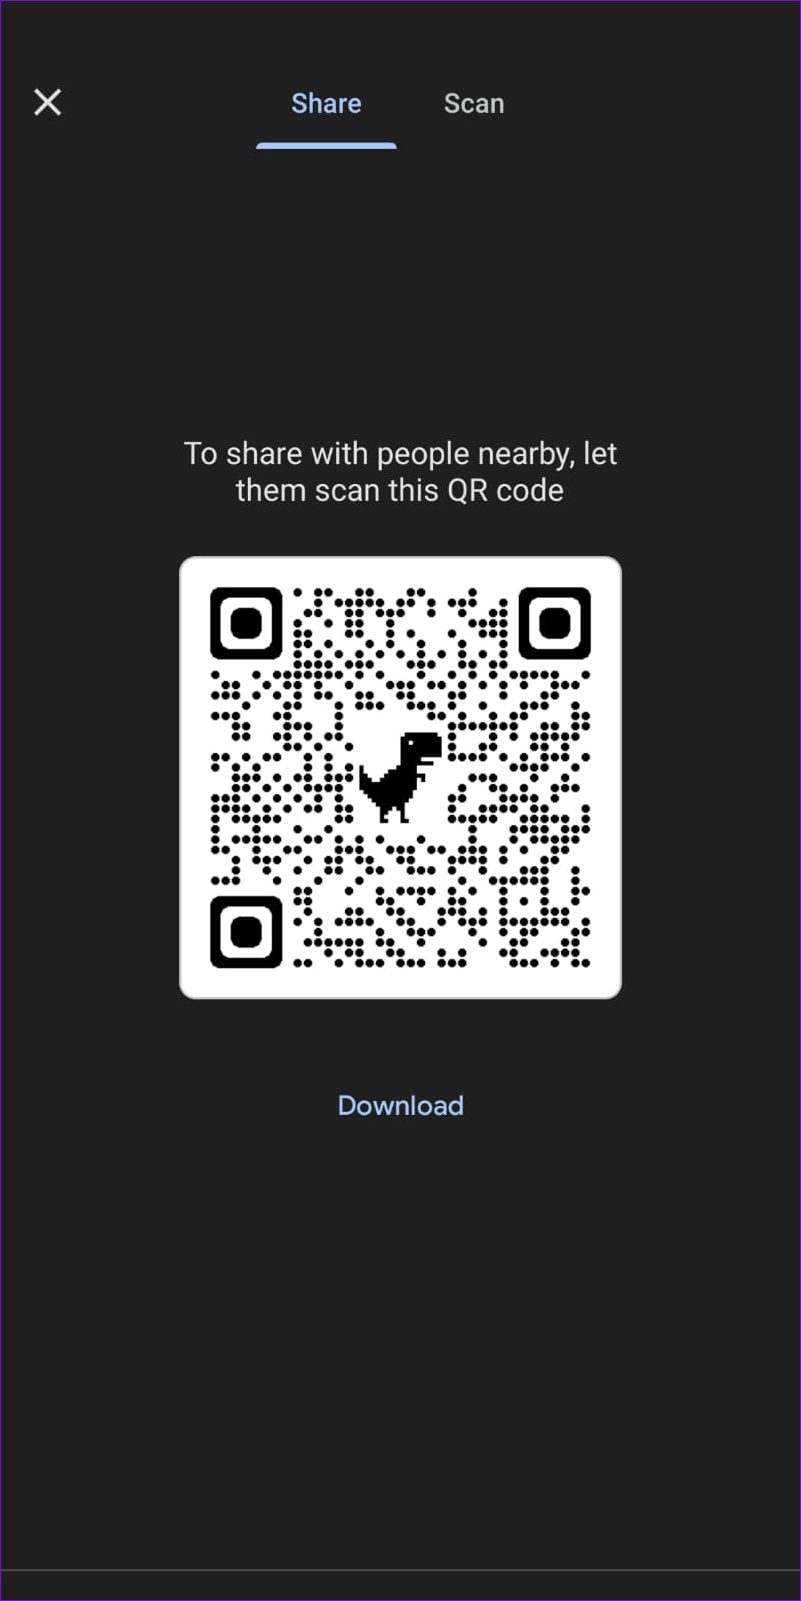 Share Link as QR Code on Chrome for Mobile